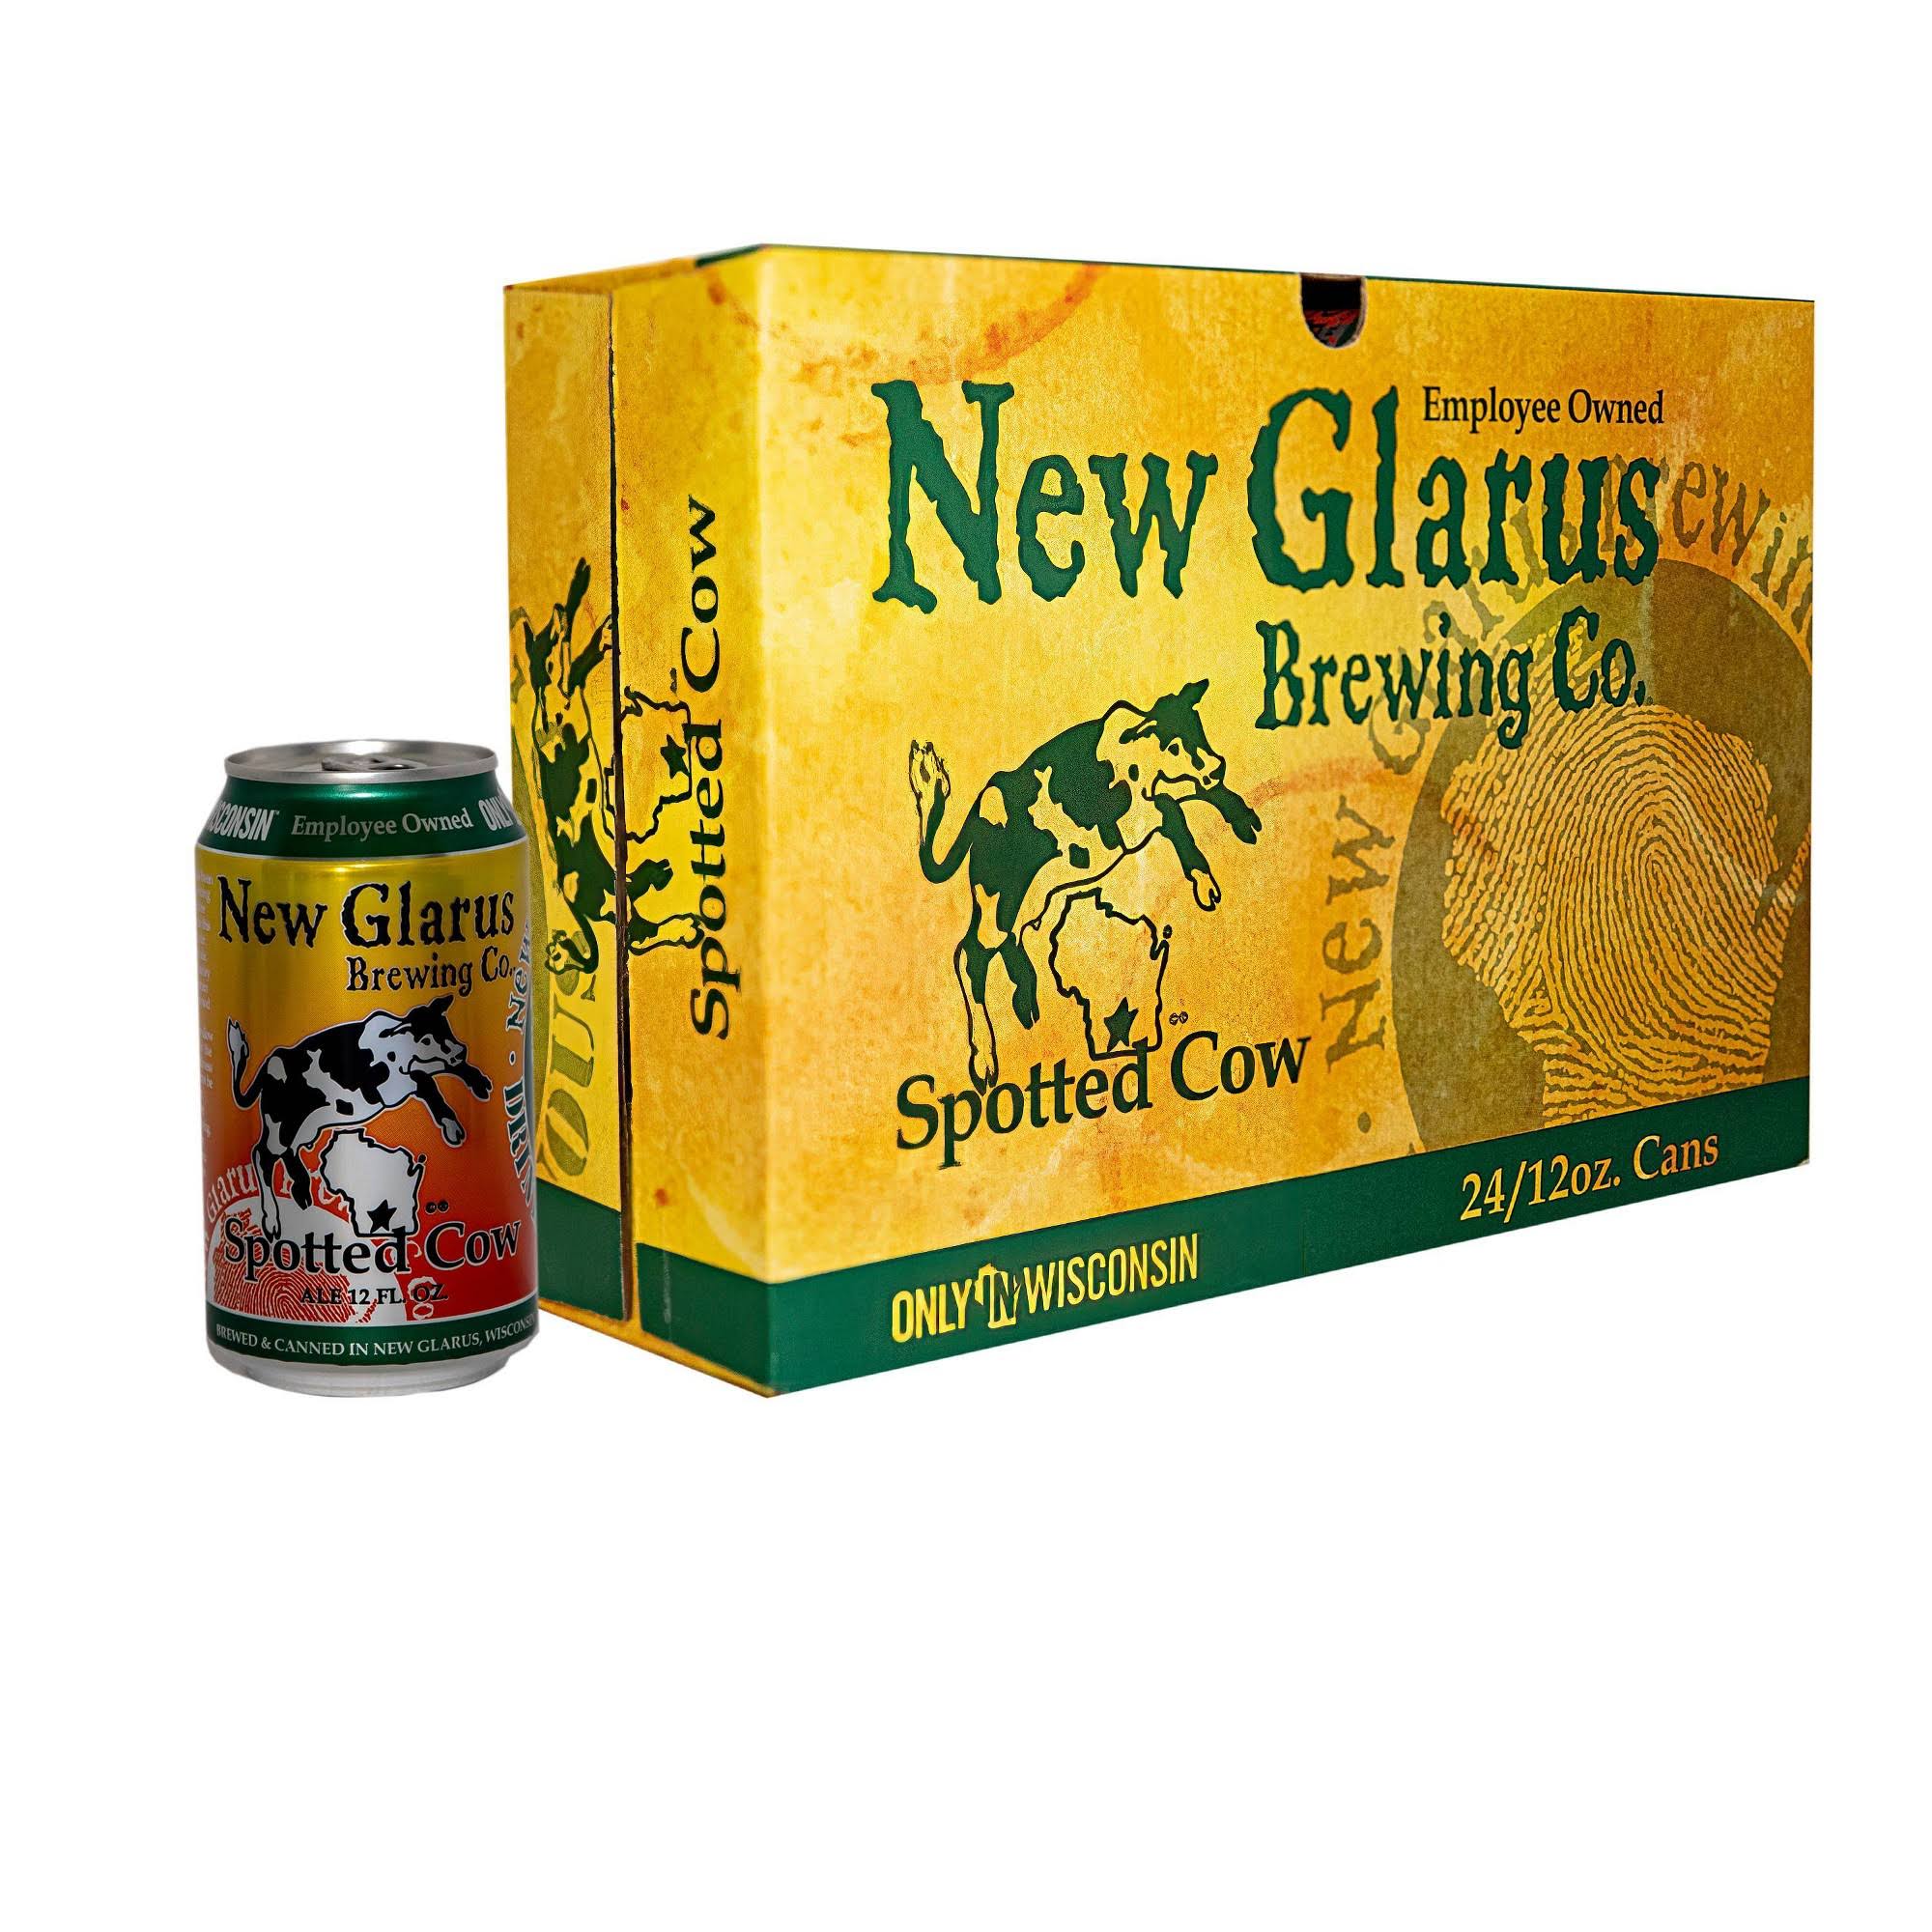 New Glarus Spotted Cow Ale Beer - 24pk/12 fl oz Cans